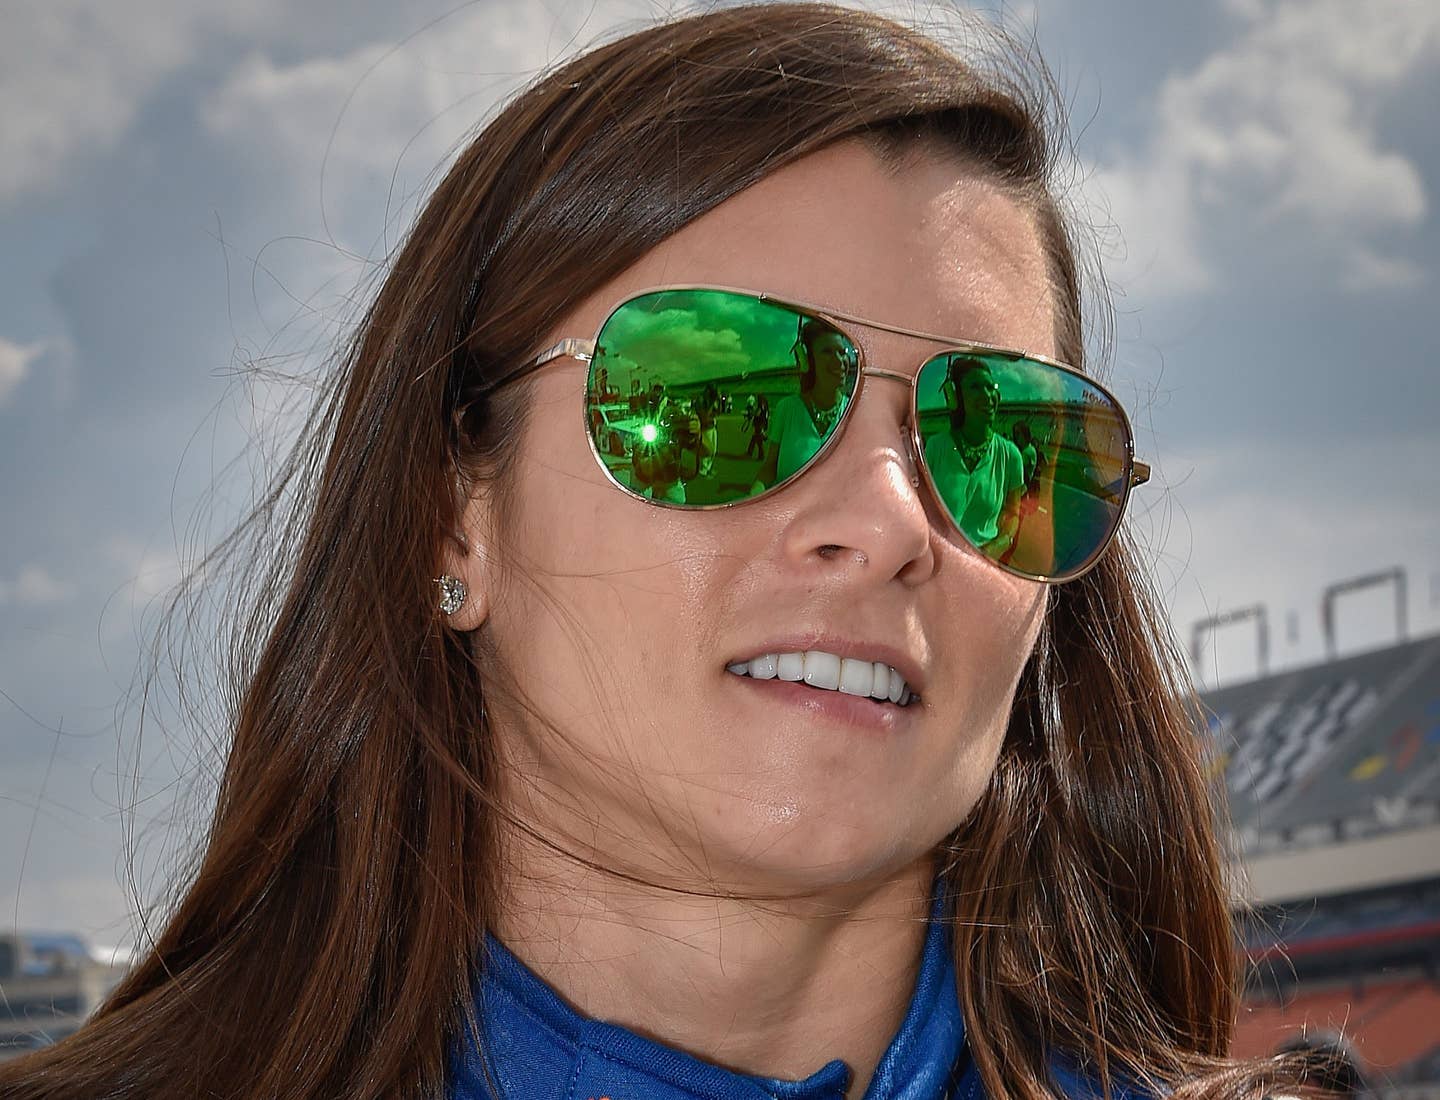 Why Danica Patrick Has Let Me Down